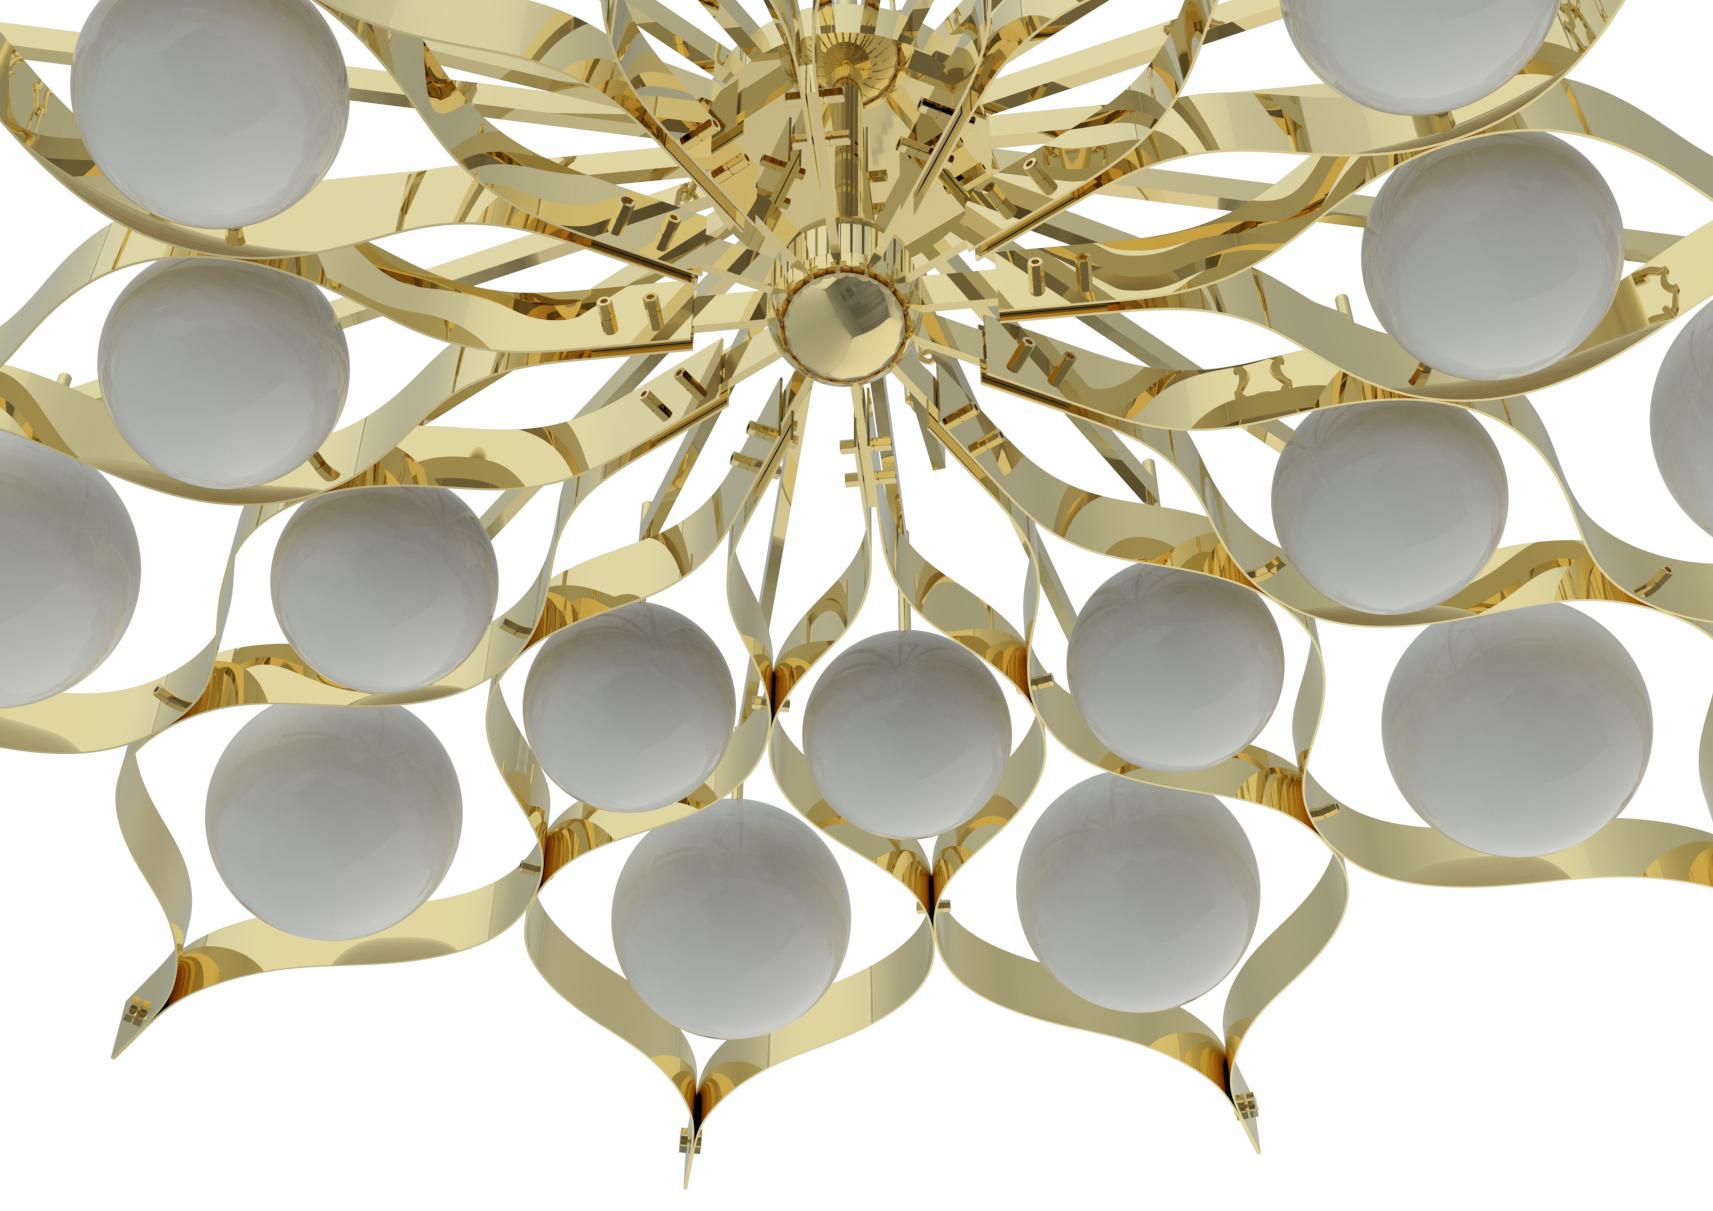 Italian 21st Century Pavone Large Pendant Lamp with chains, UL, phase cut, Gio Ponti For Sale